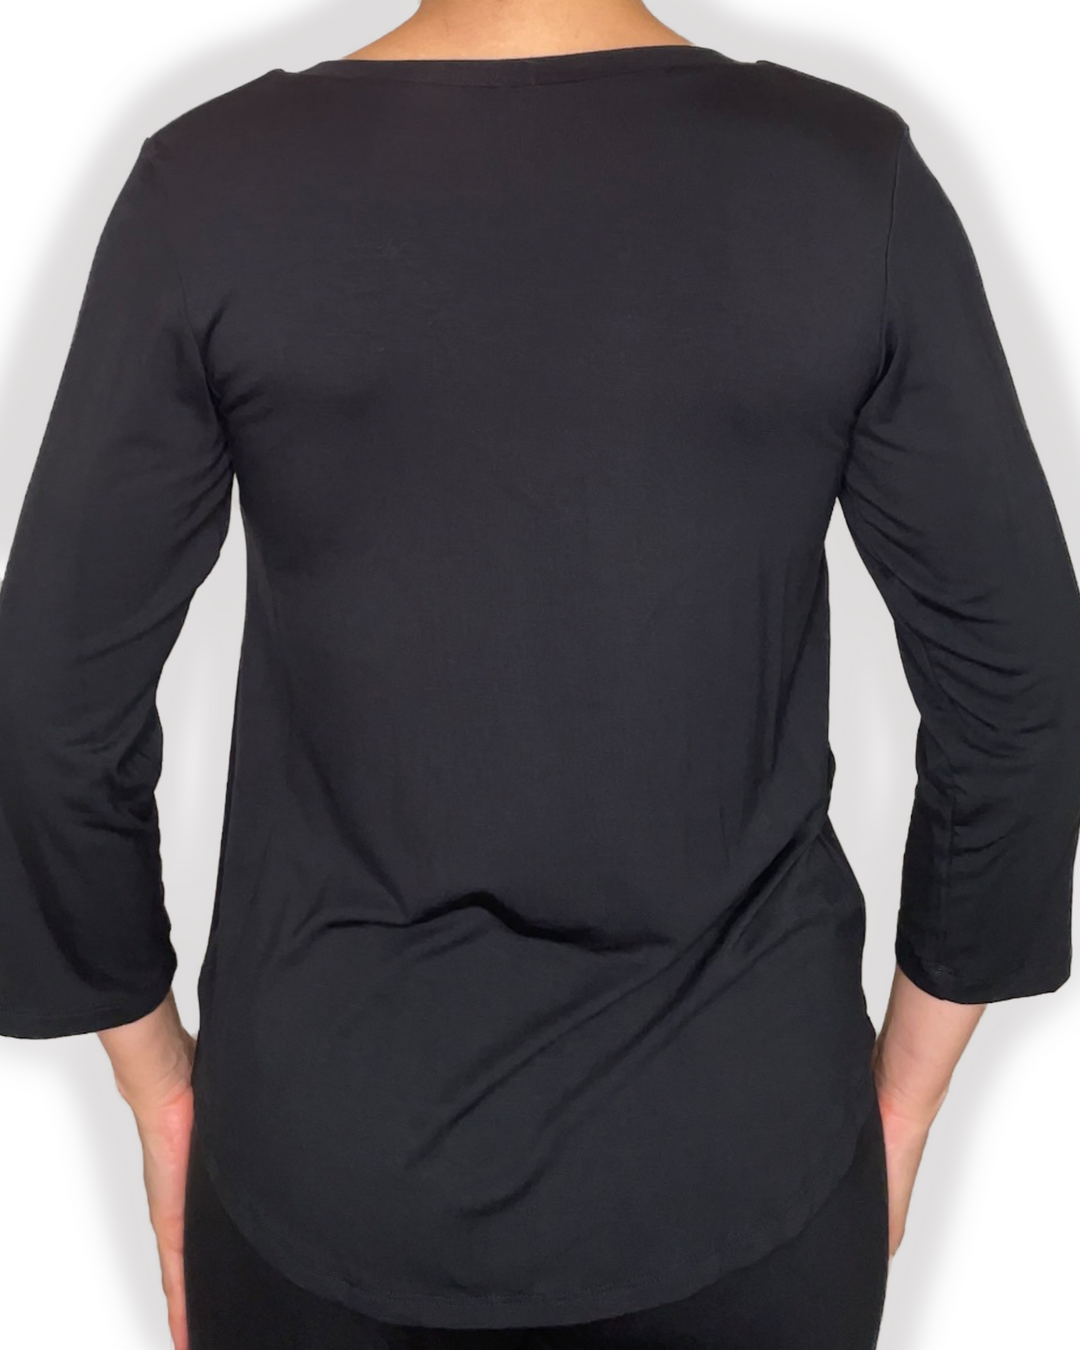 EILEEN Braless Bamboo 3/4 Sleeve Top with center inverted pleat design in black color back view